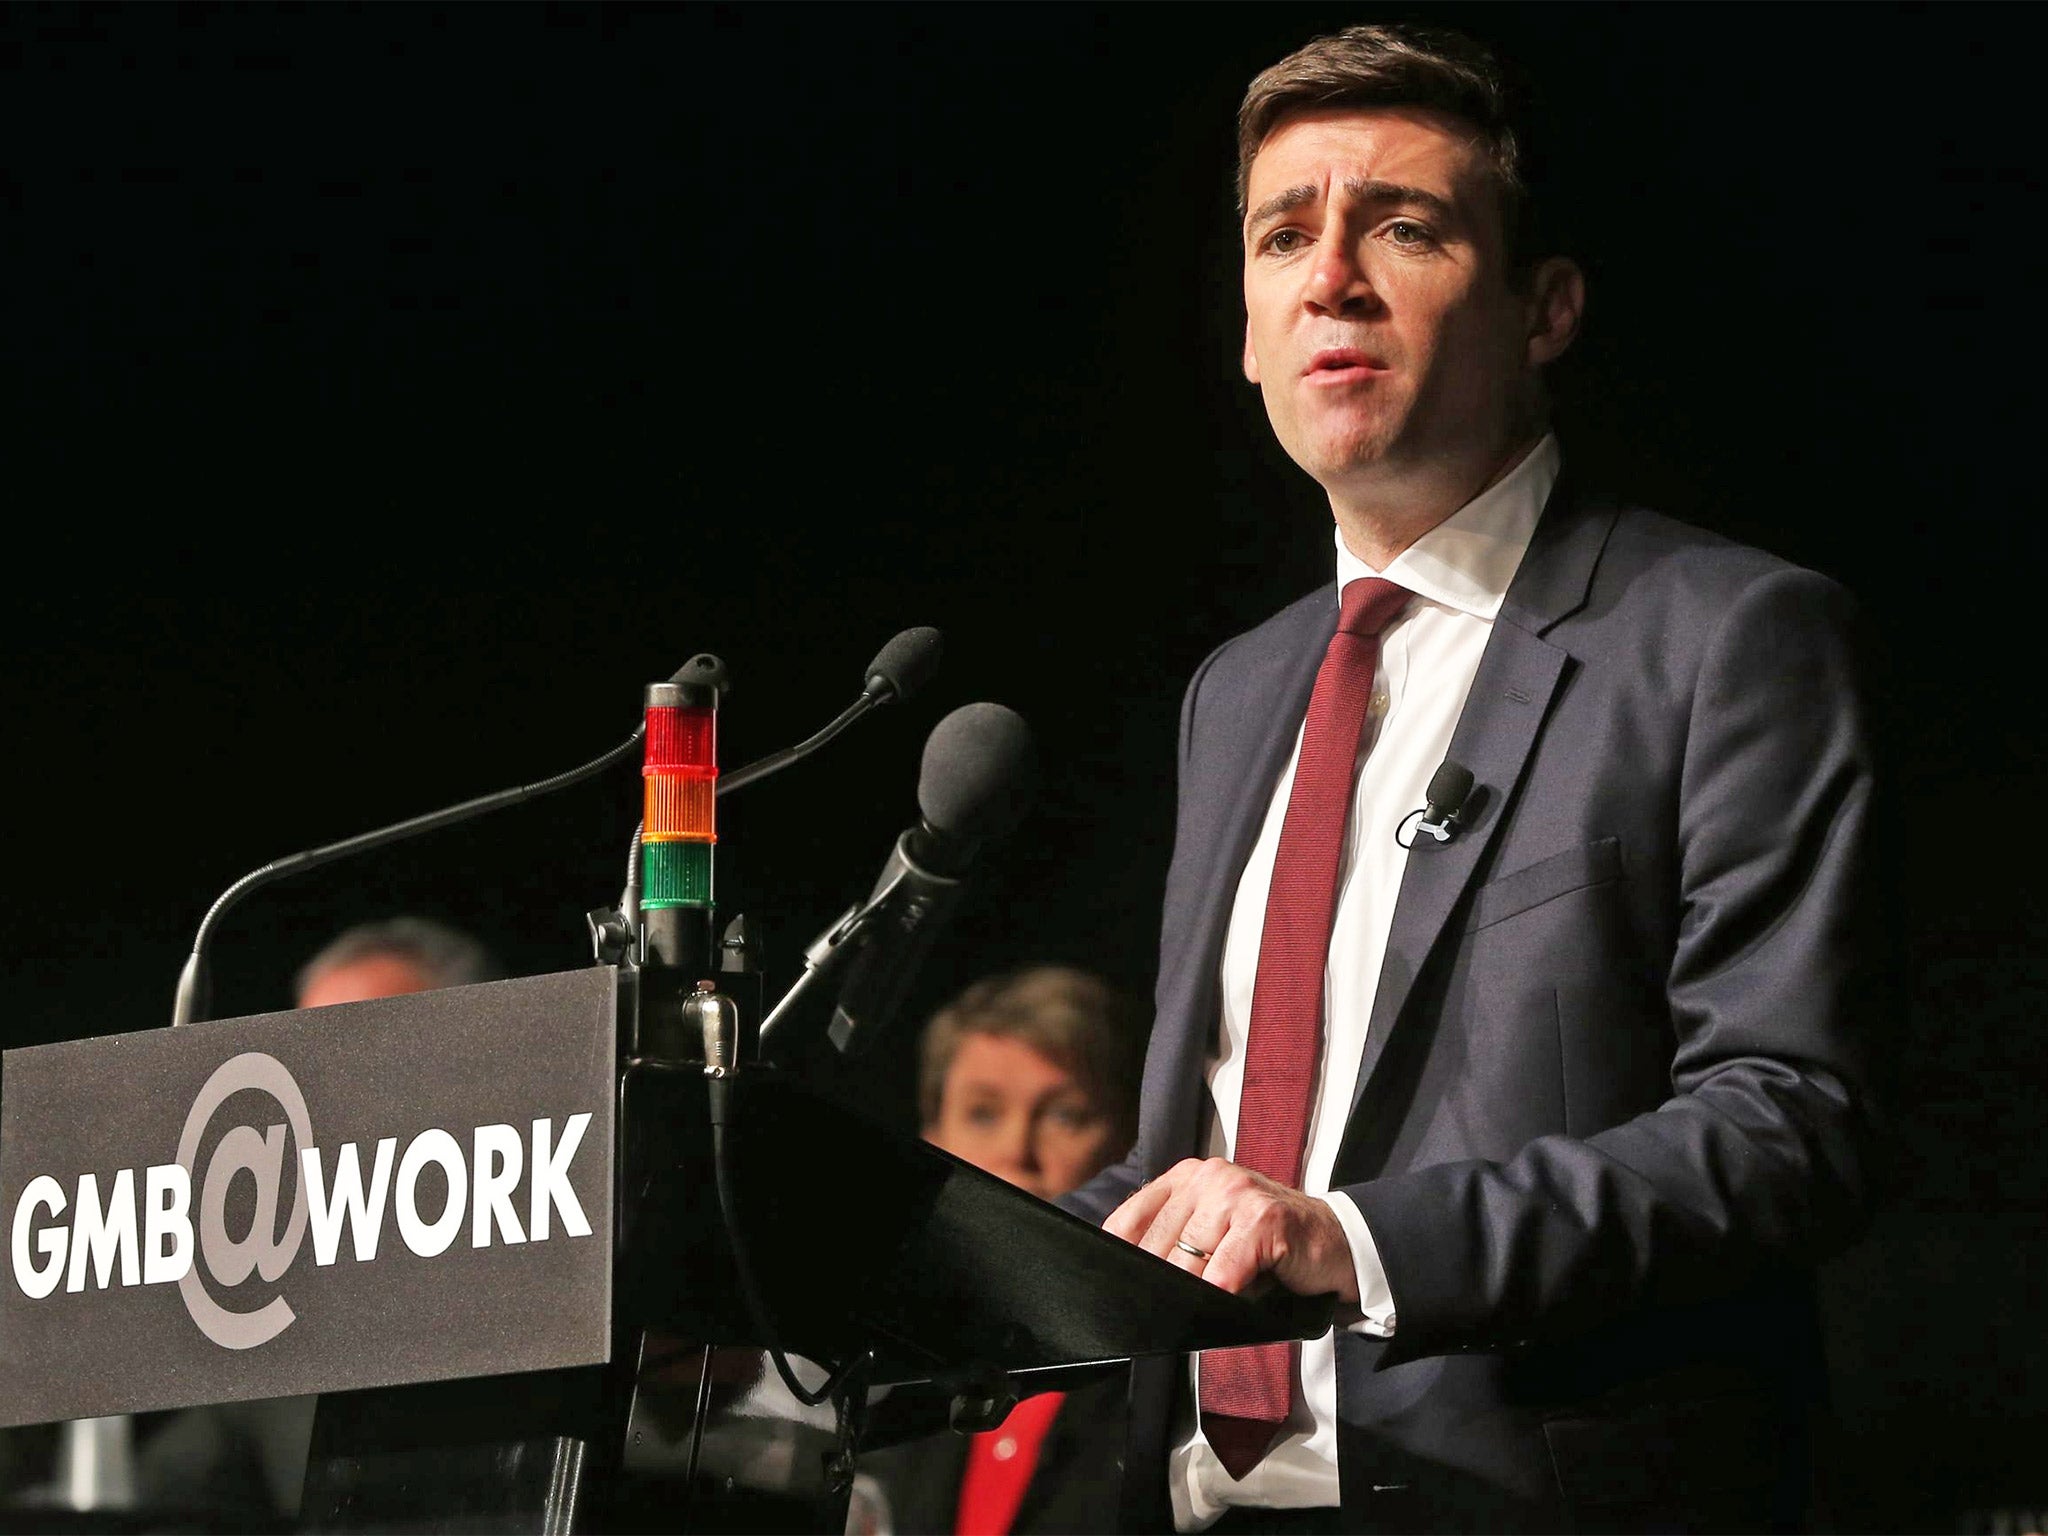 Labour leadership contender Andy Burnham addresses delegates at the annual conference of the GMB union in Dublin